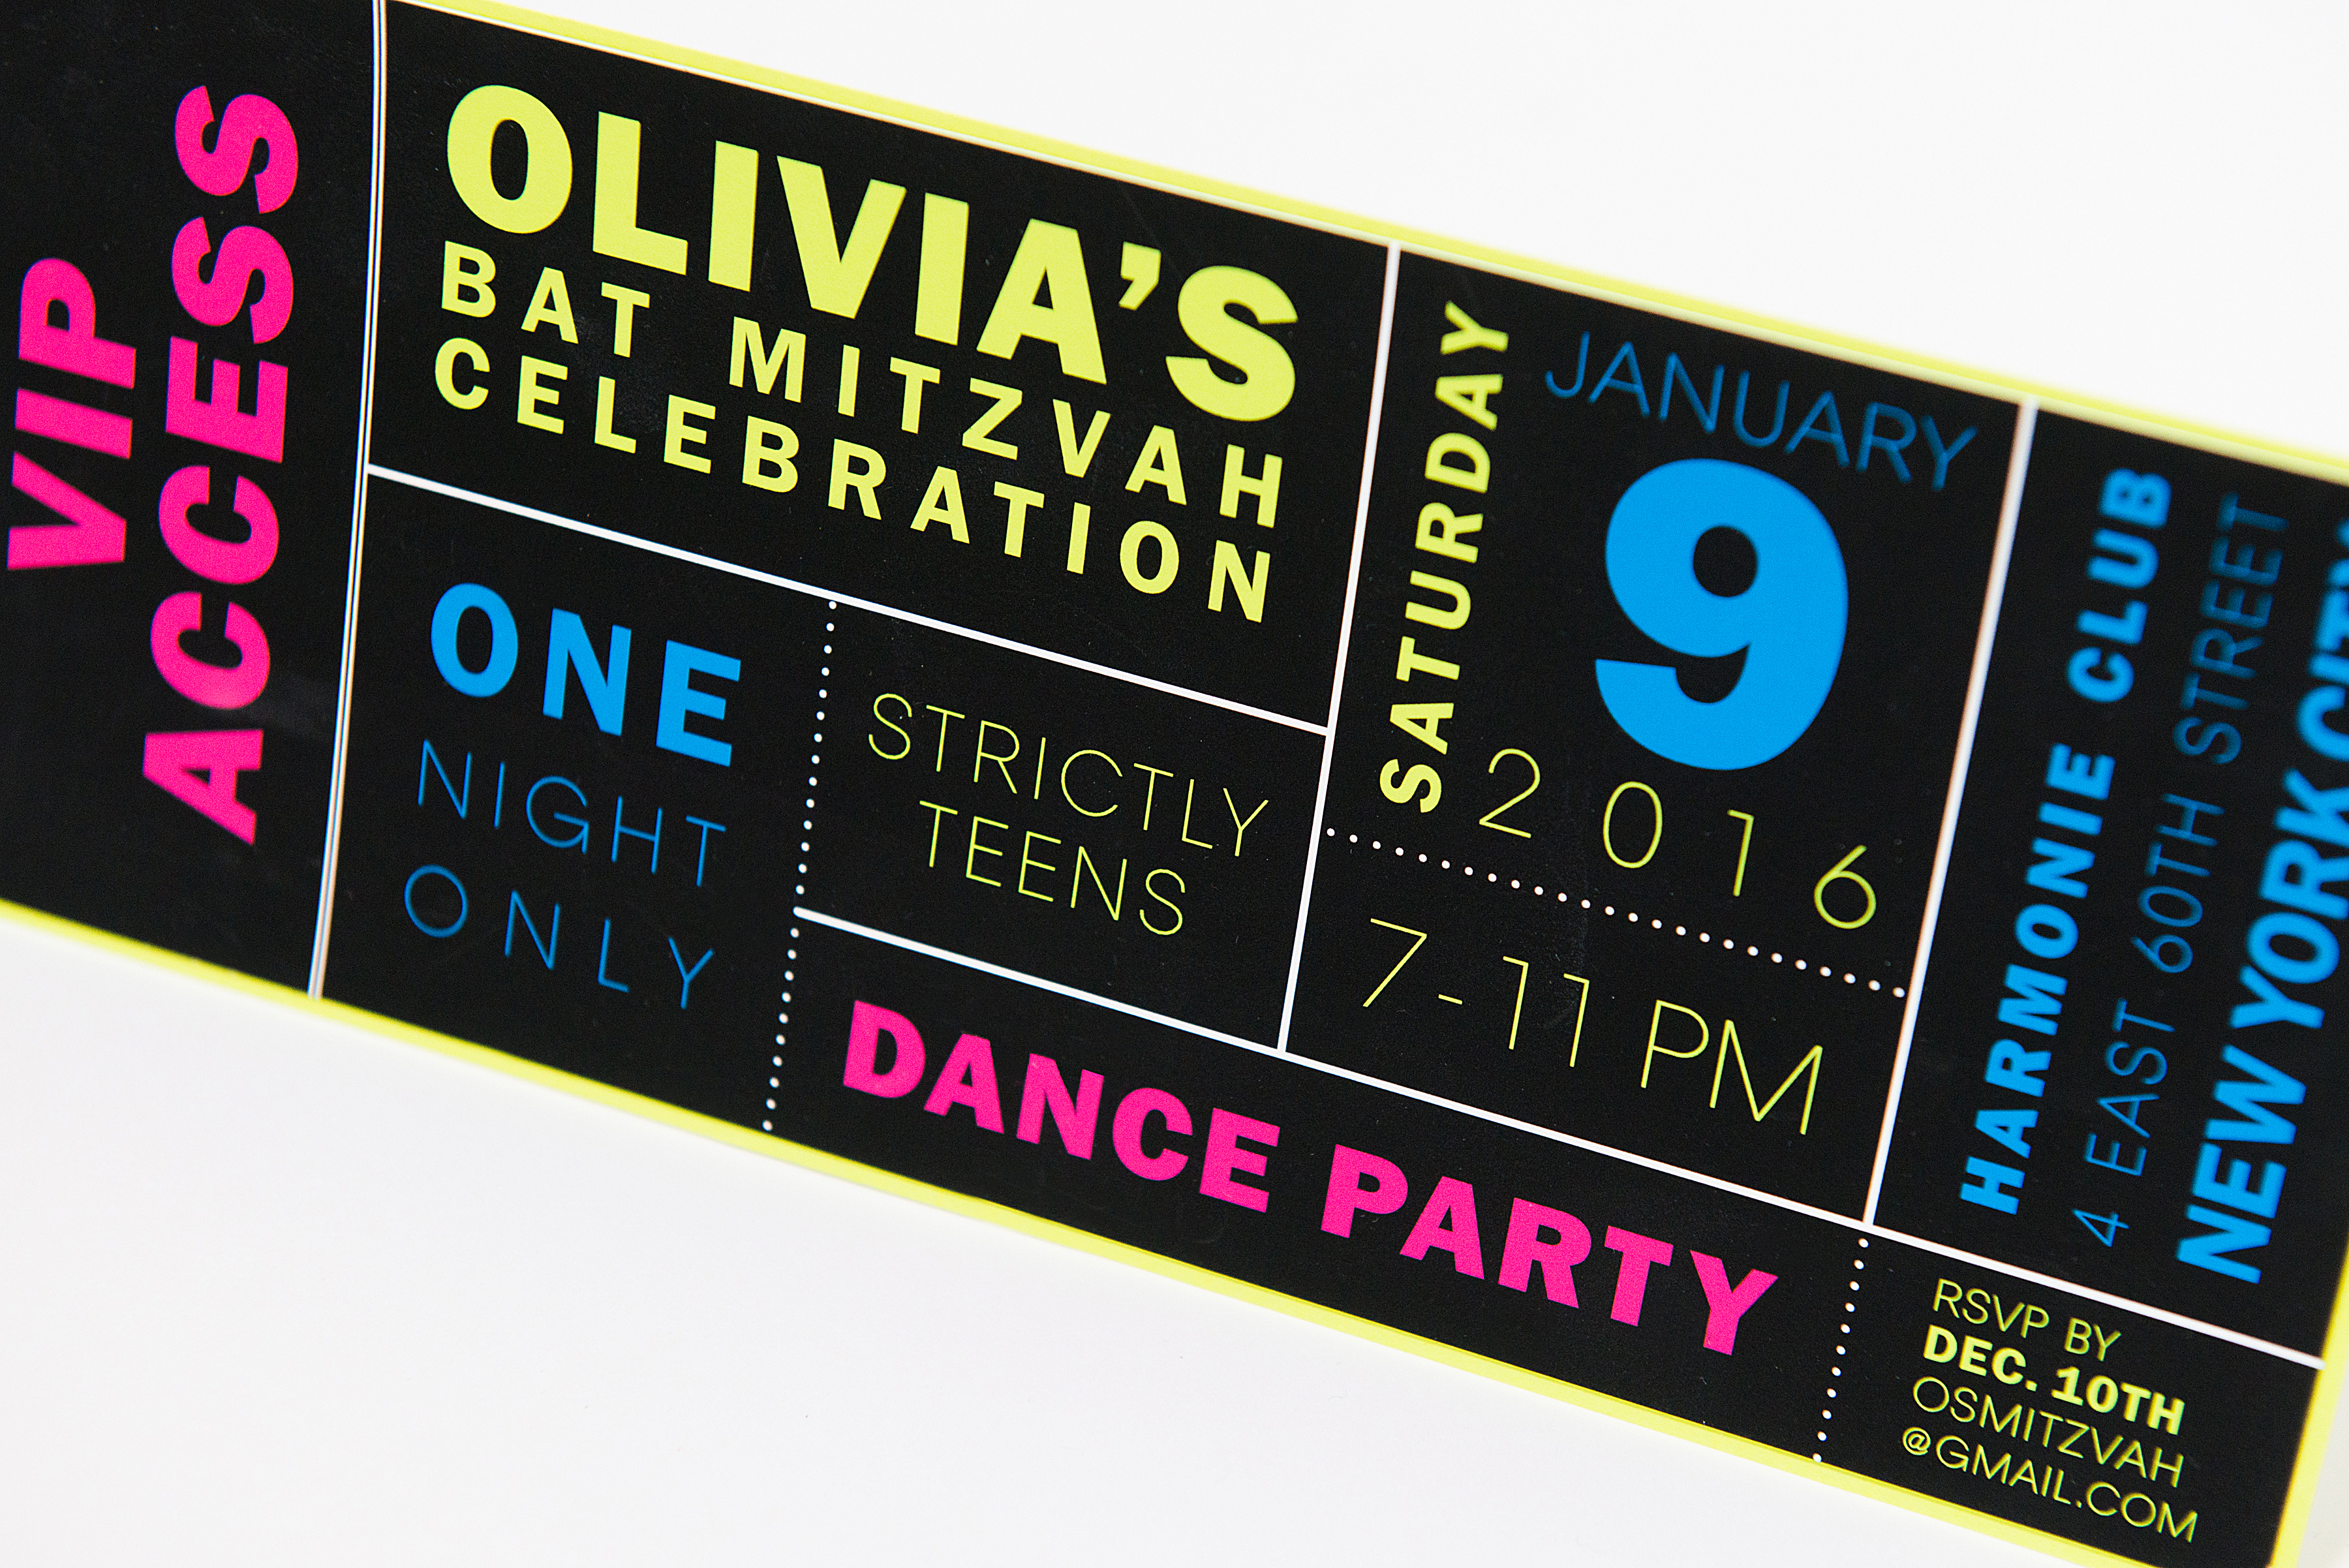 Cool ticket style invite